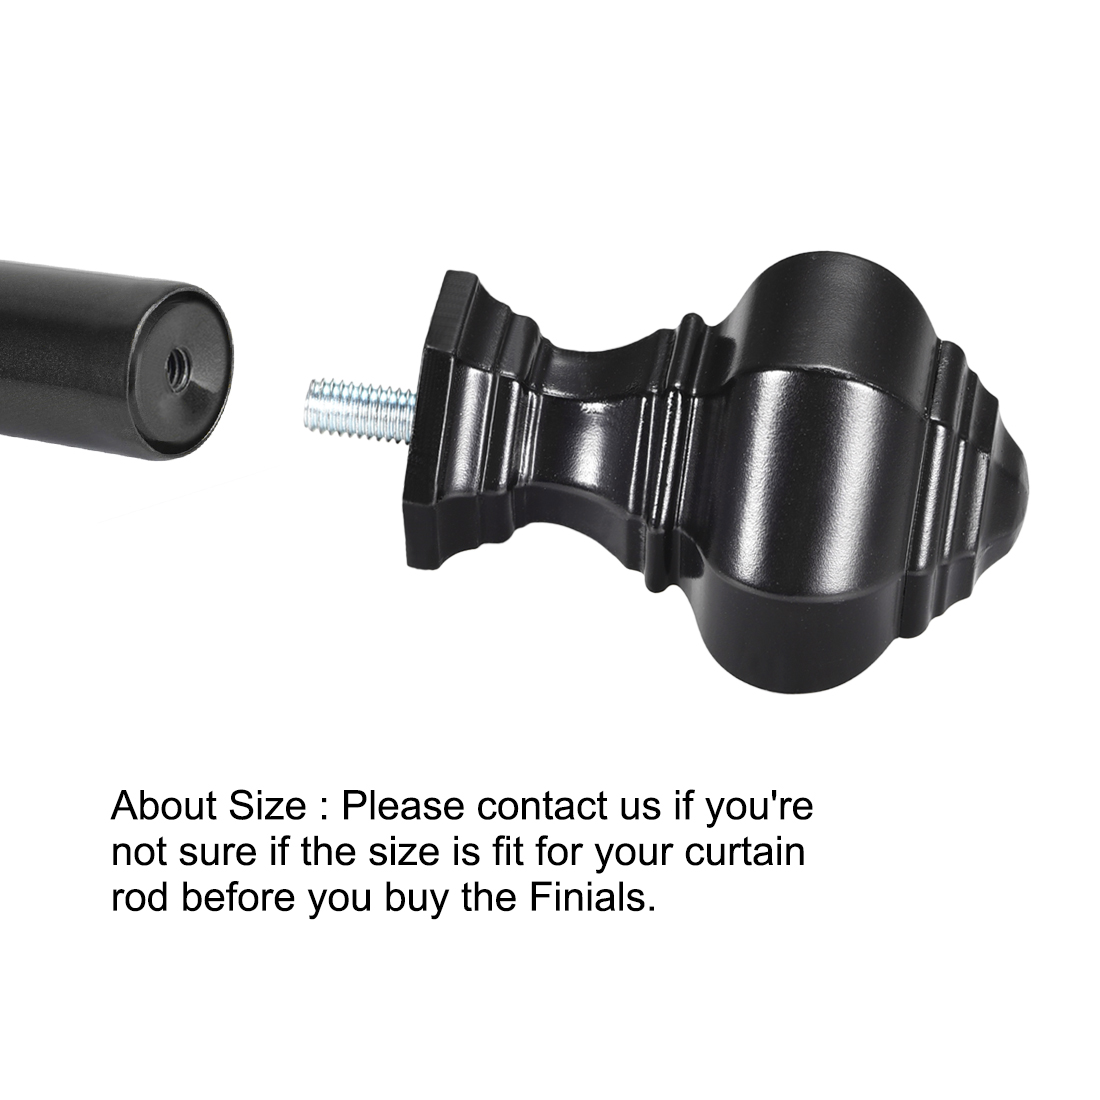 Uxcell 14mm Dia Curtain Rod Finials Plastic Black 4Pack - image 5 of 7